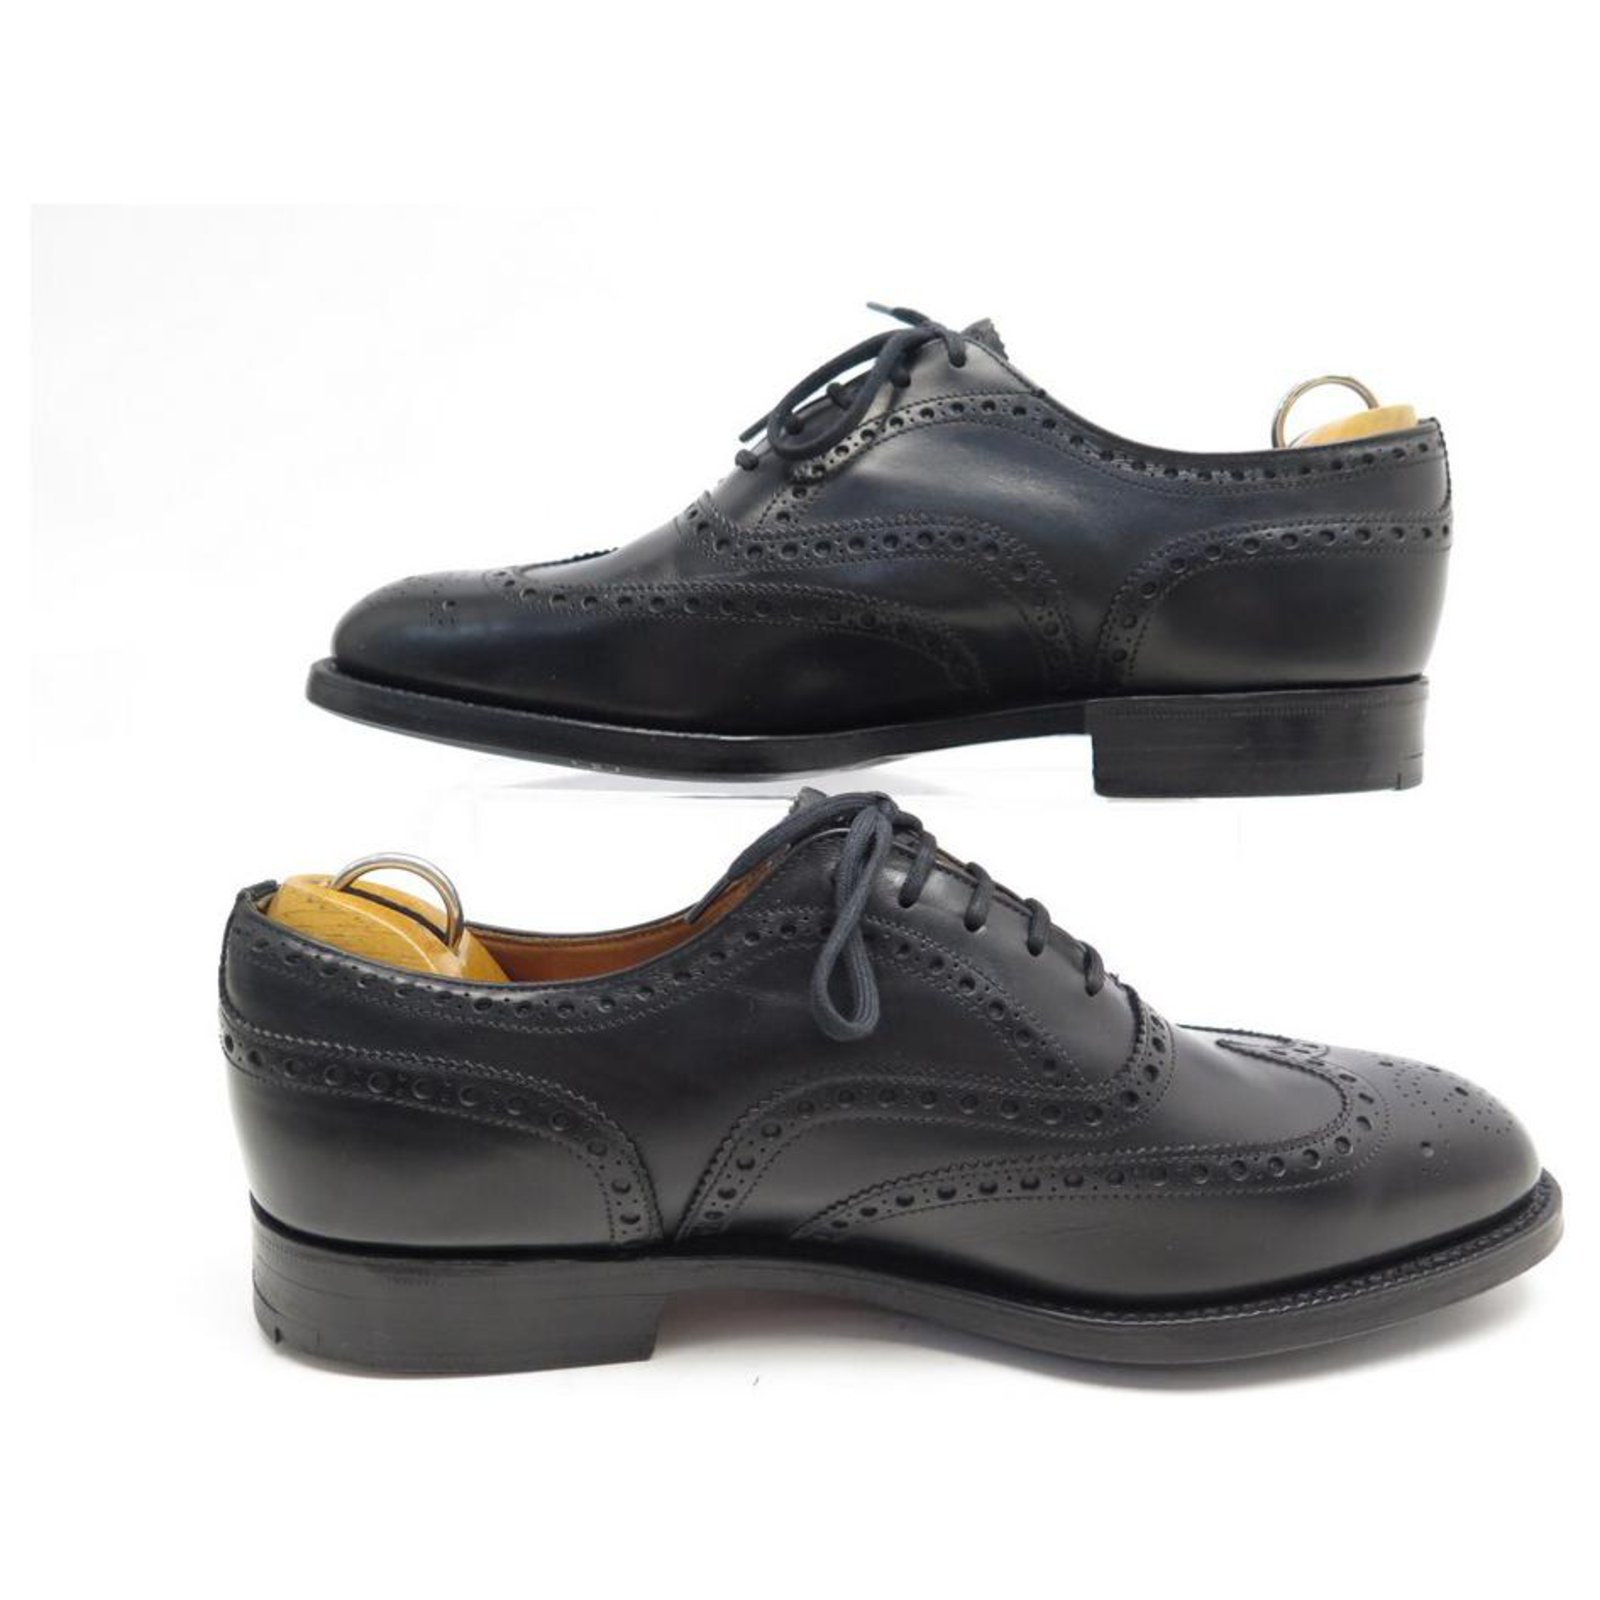 CHURCH'S CHETWYND RICHELIEU SHOES 6.5g 40.5 Wide 41 BLACK LEATHER